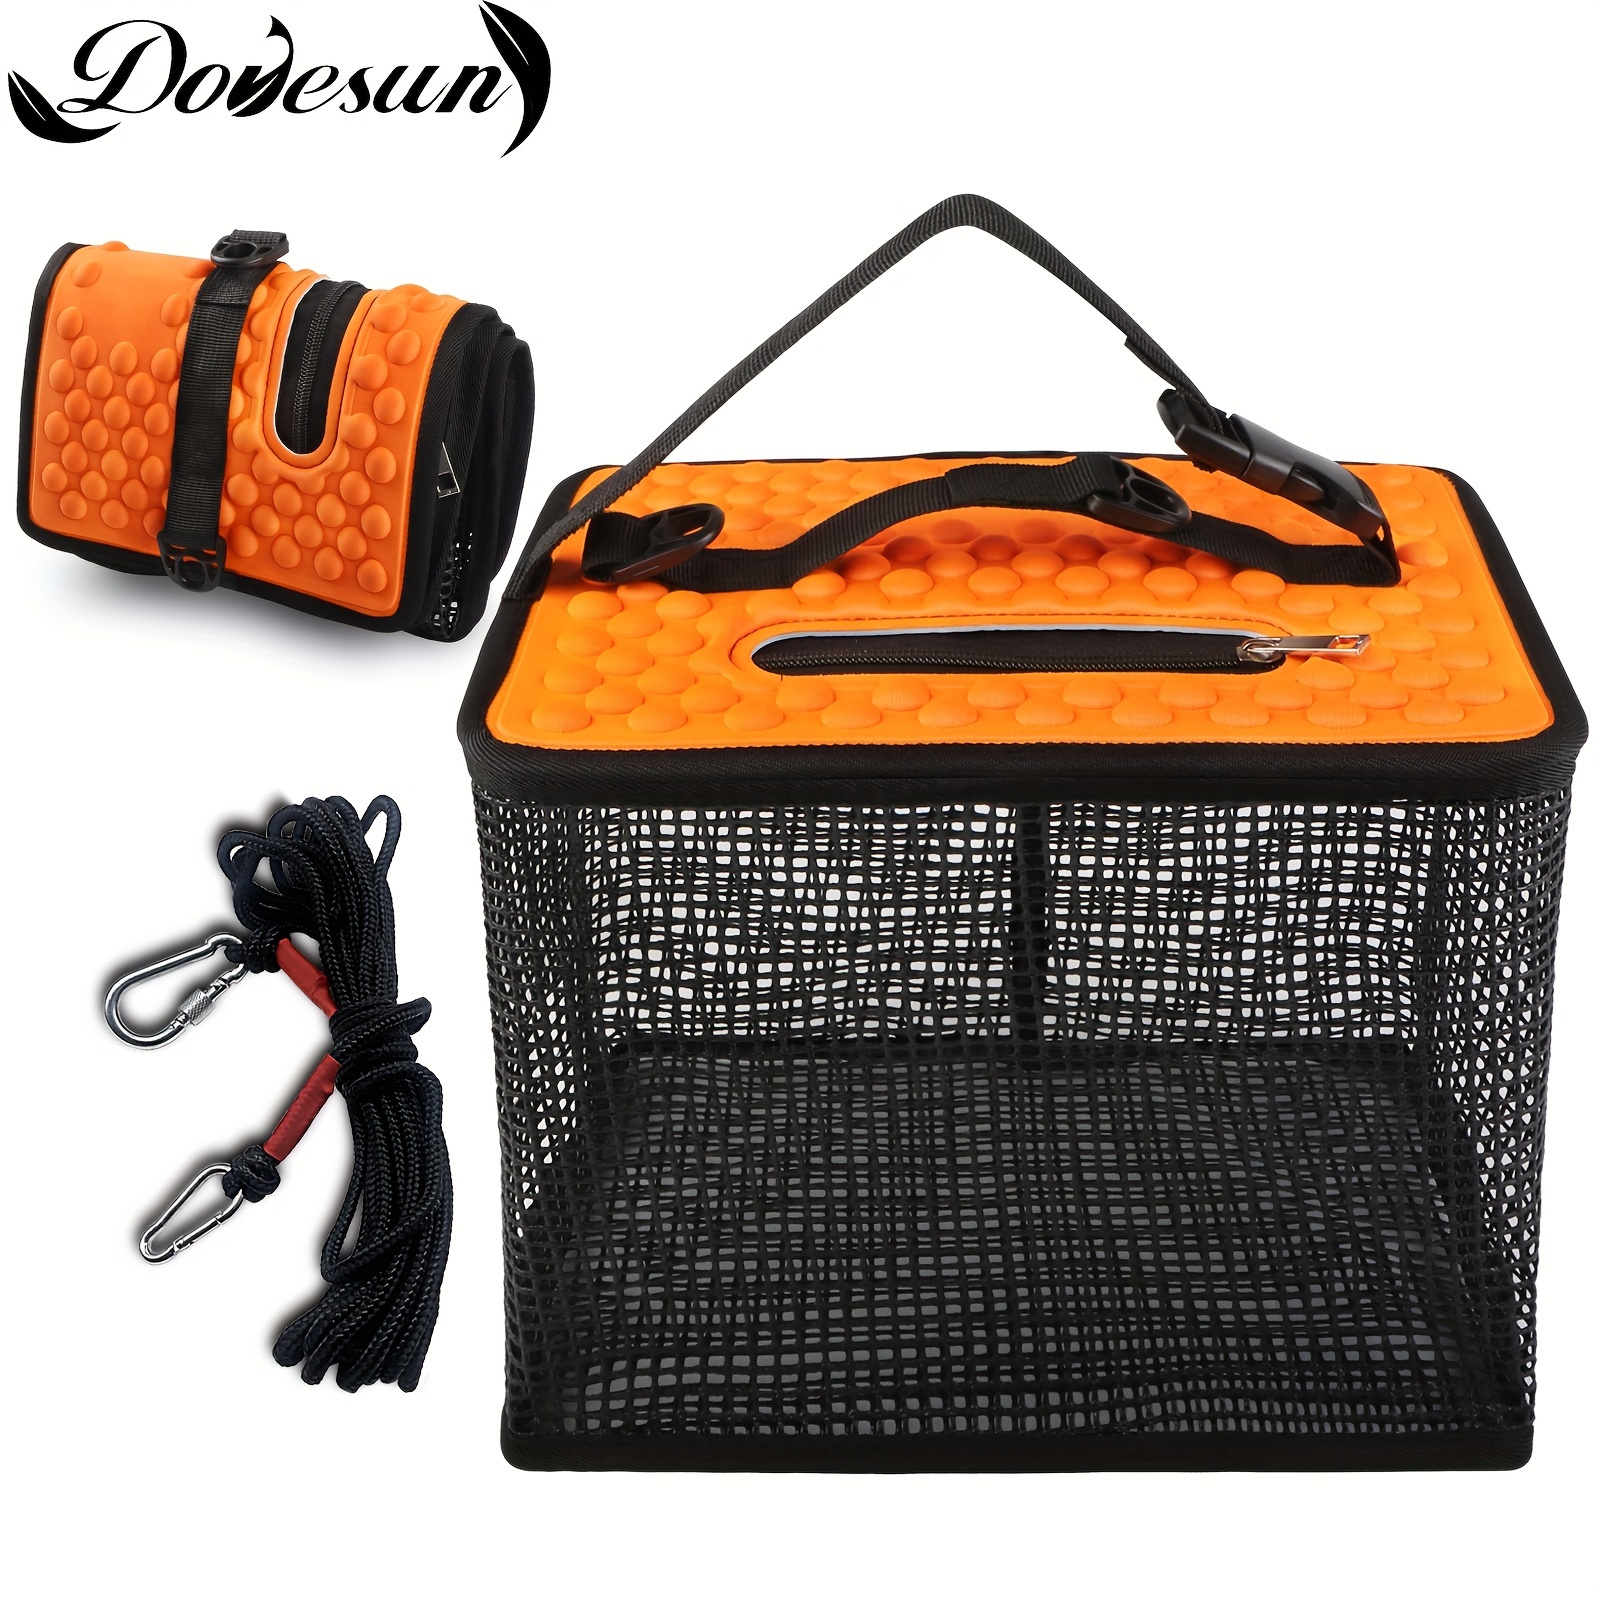 

Dovesun 1pc Floating Fish Basket, 13.5l/5 Gallon Quick-drying Rubber Coated Fish Guard, Portable Mesh Cage